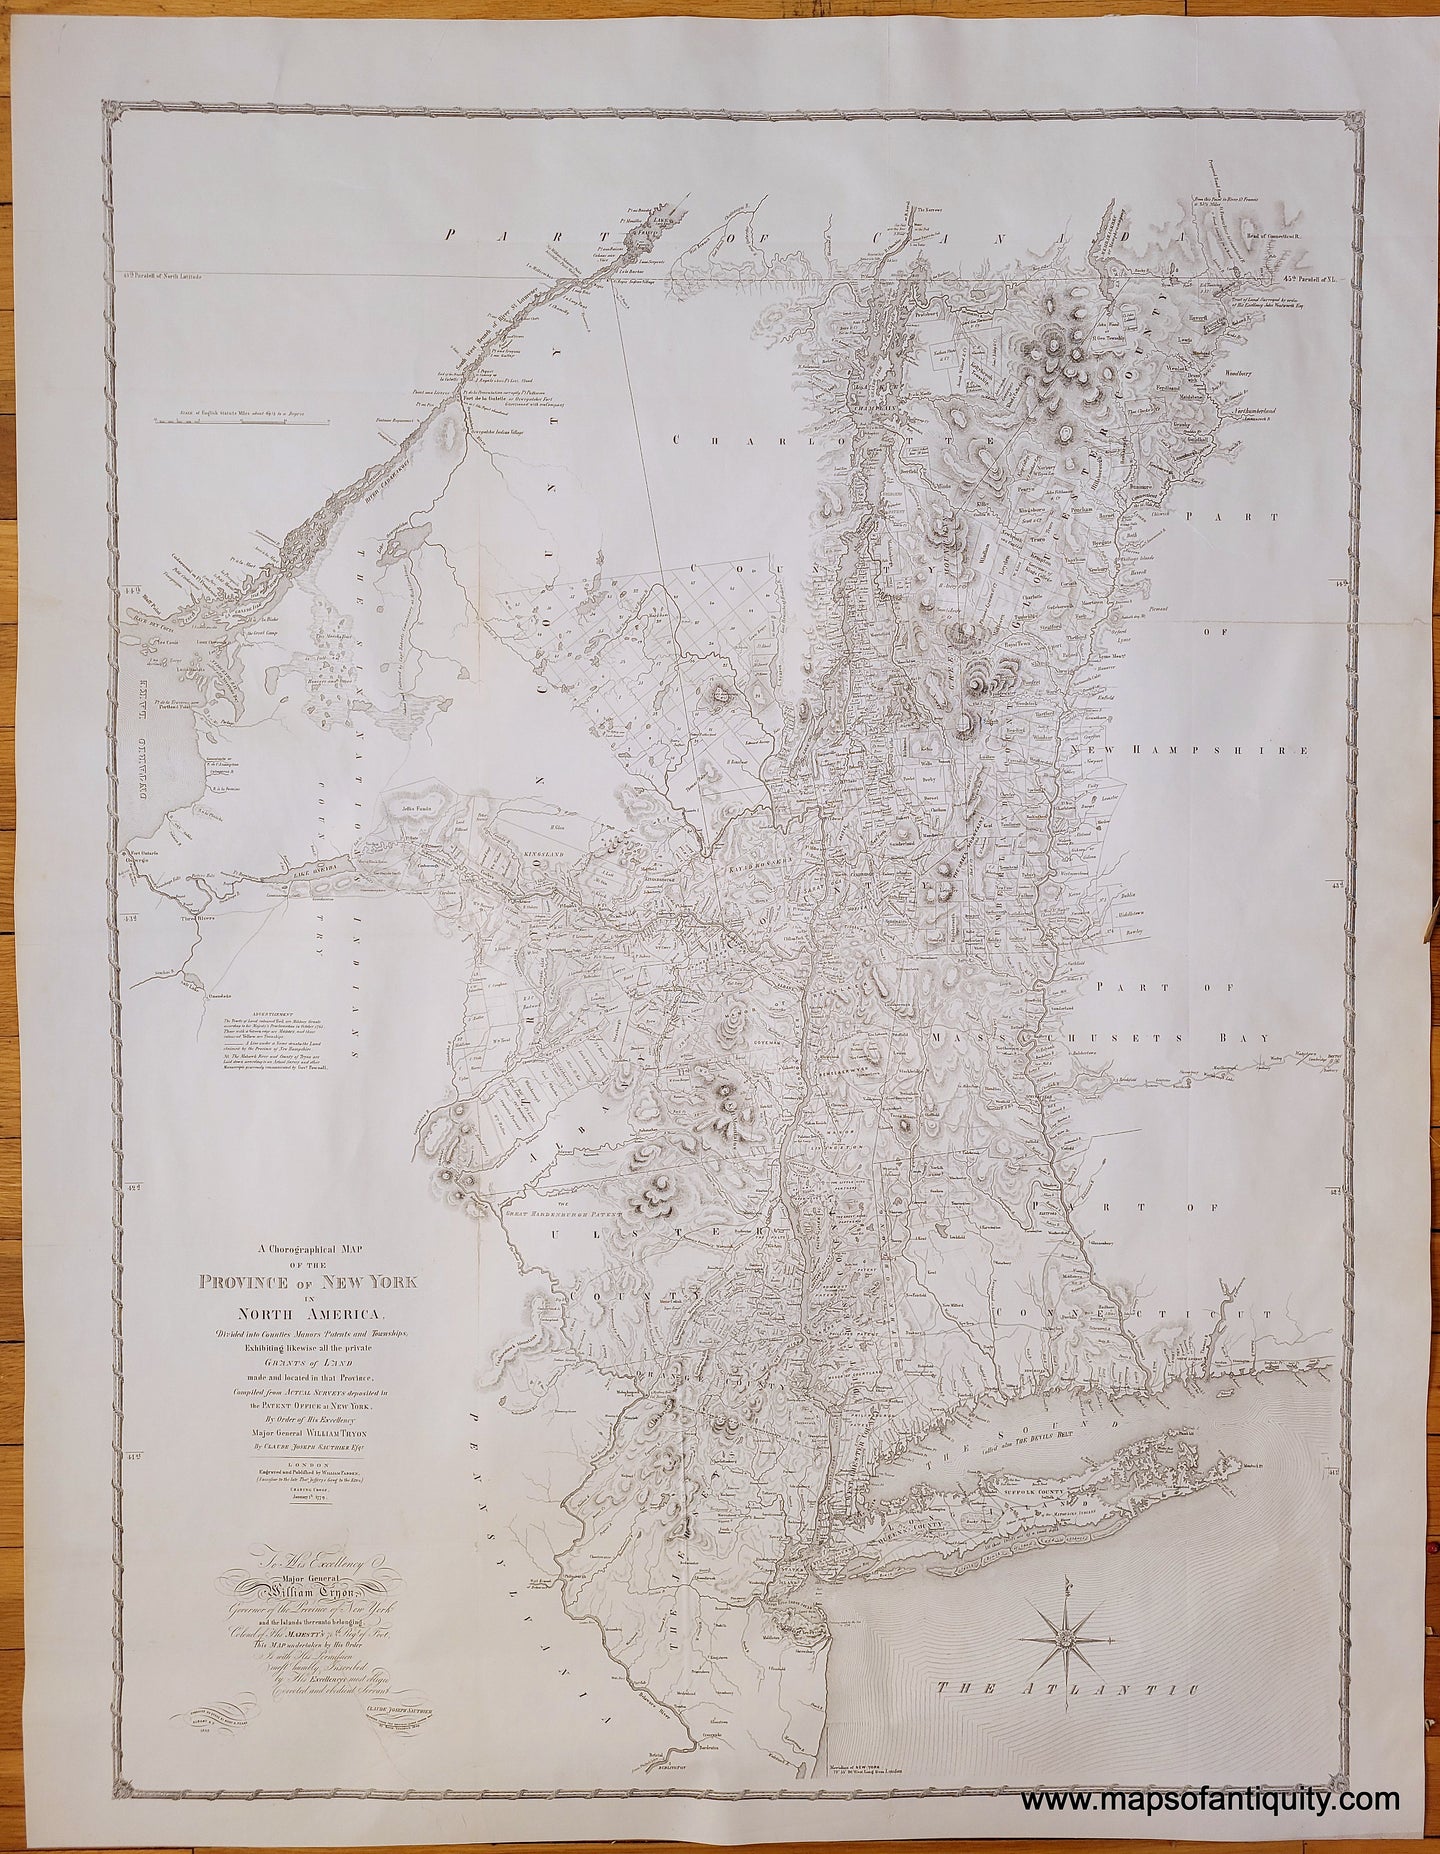 Antique-Map-A-Chorographical-Map-of-the-Province-of-New-York-in-North-America-1849-Pease-1840s-1800s-19th-century-Maps-of-Antiquity